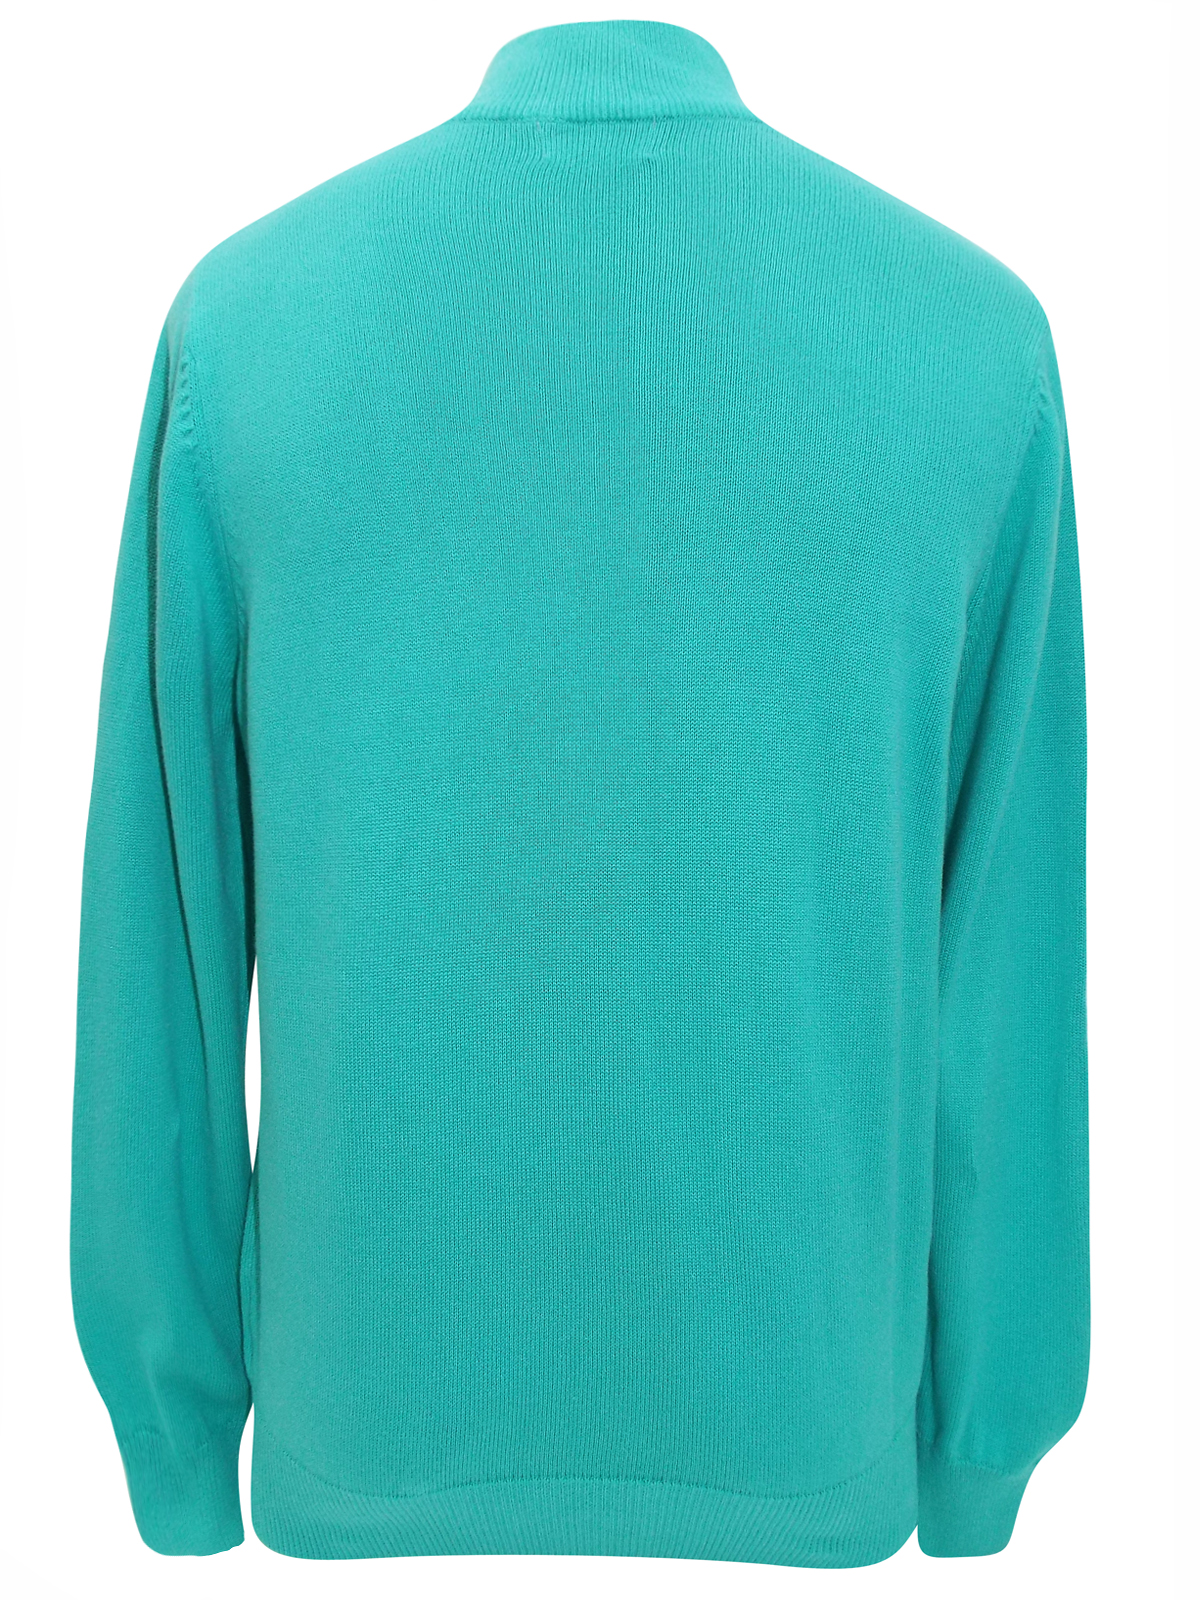 Marks and Spencer - - M&5 SEA-GREEN Pure Cotton V-Neck Jumper - Size ...